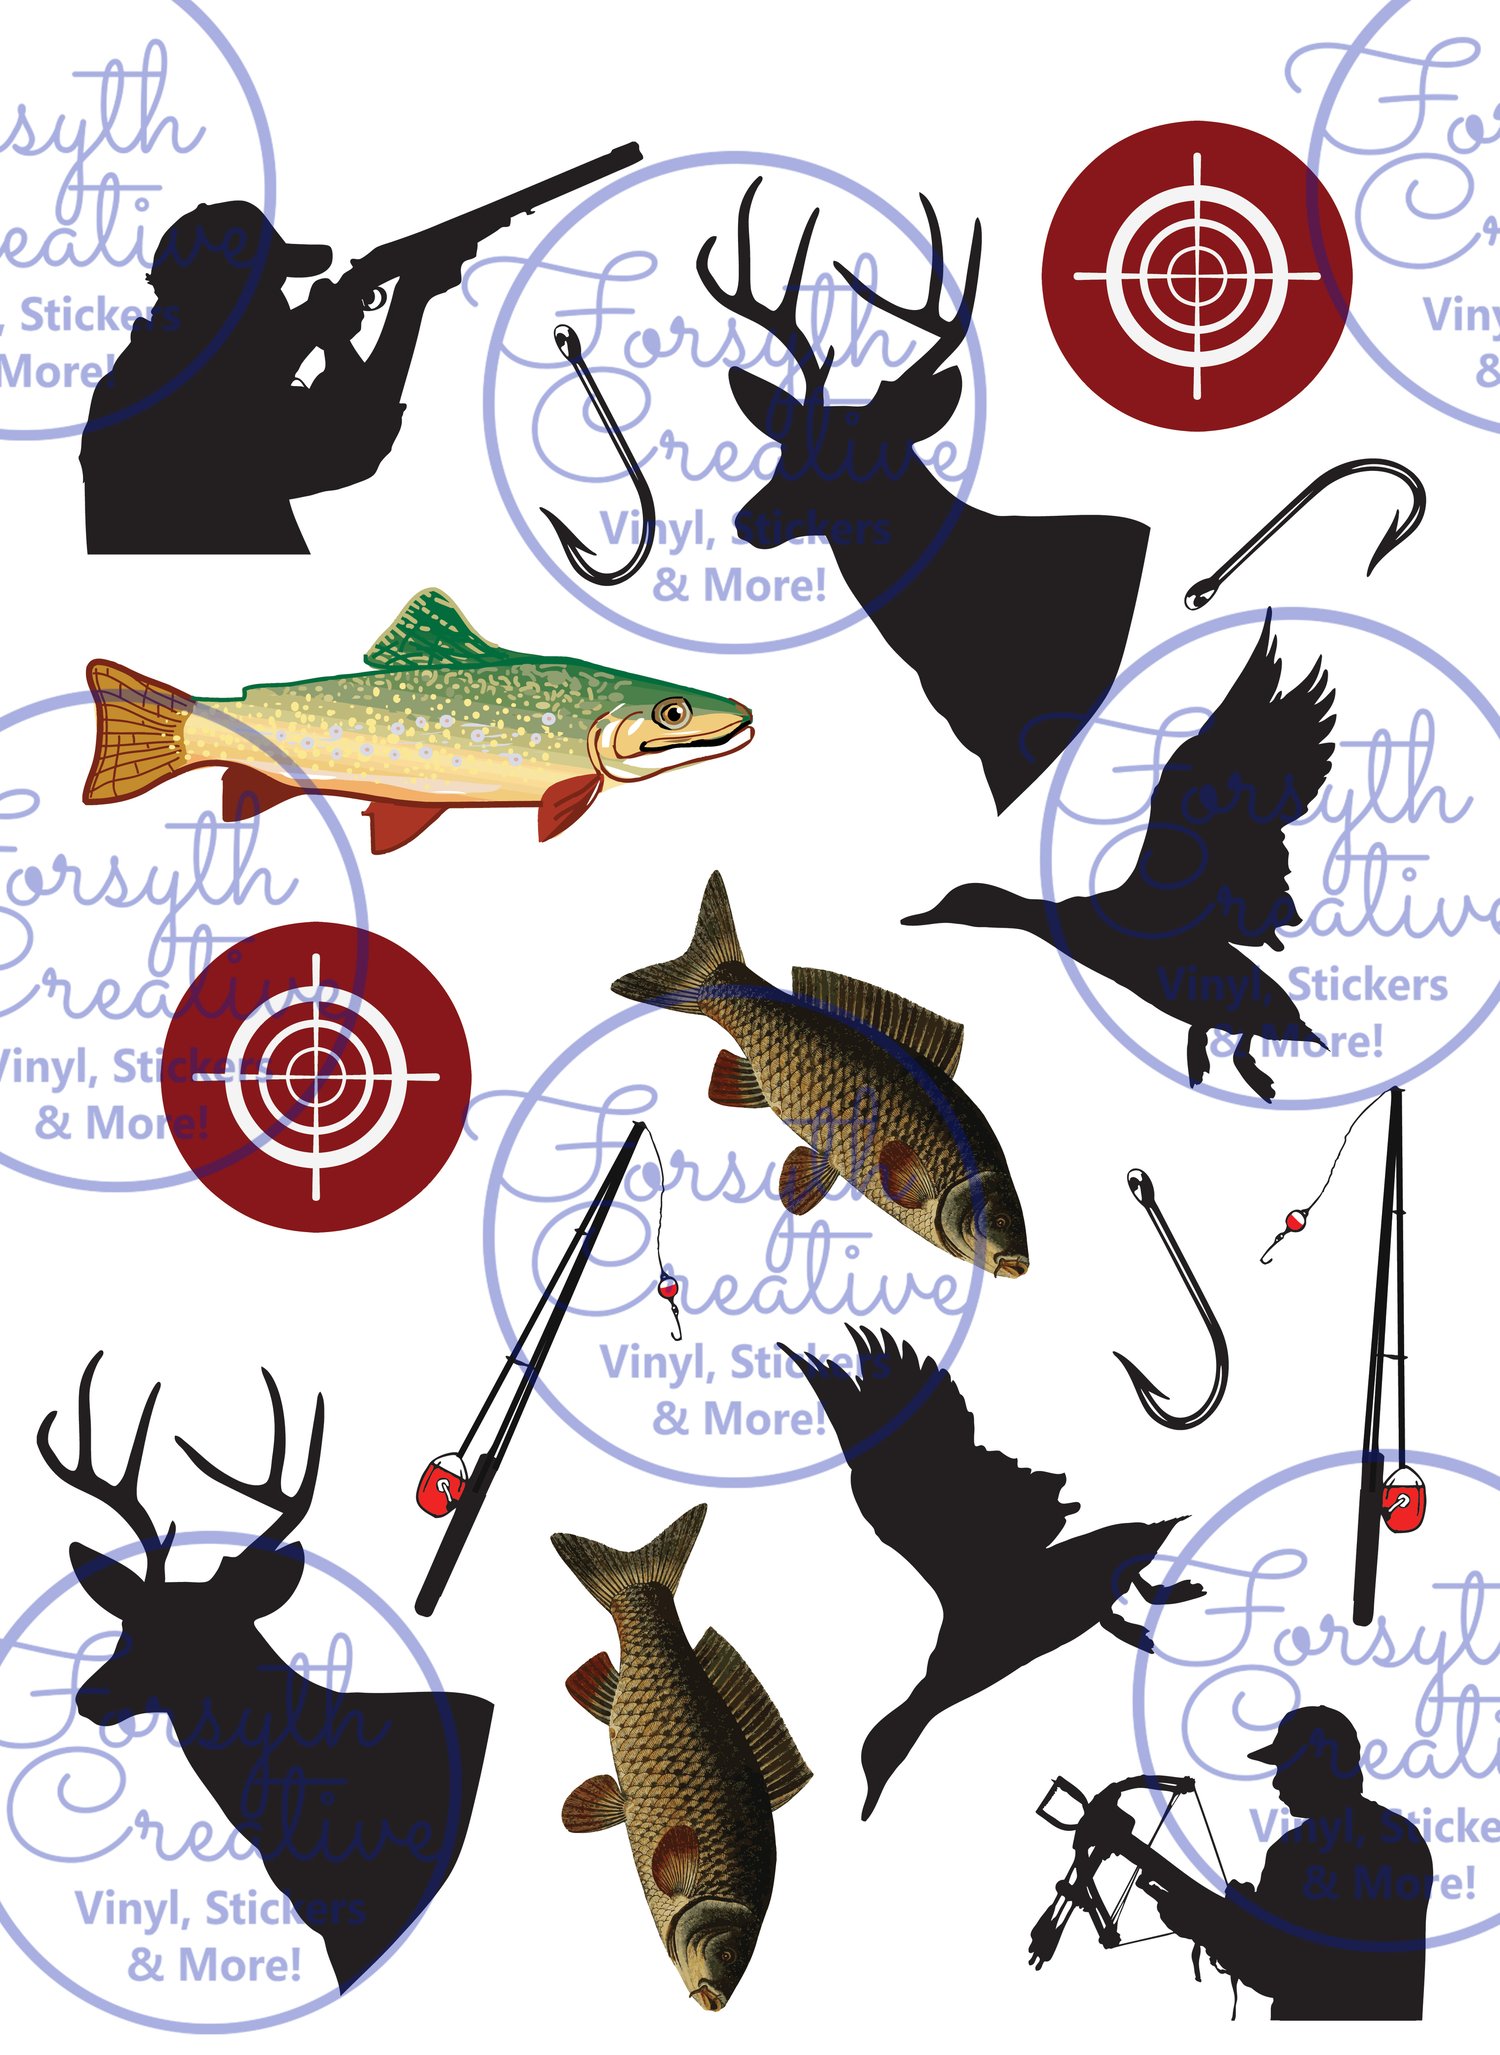 Hunting and Fishing Stickers for the Avid Hunter or Fisherman